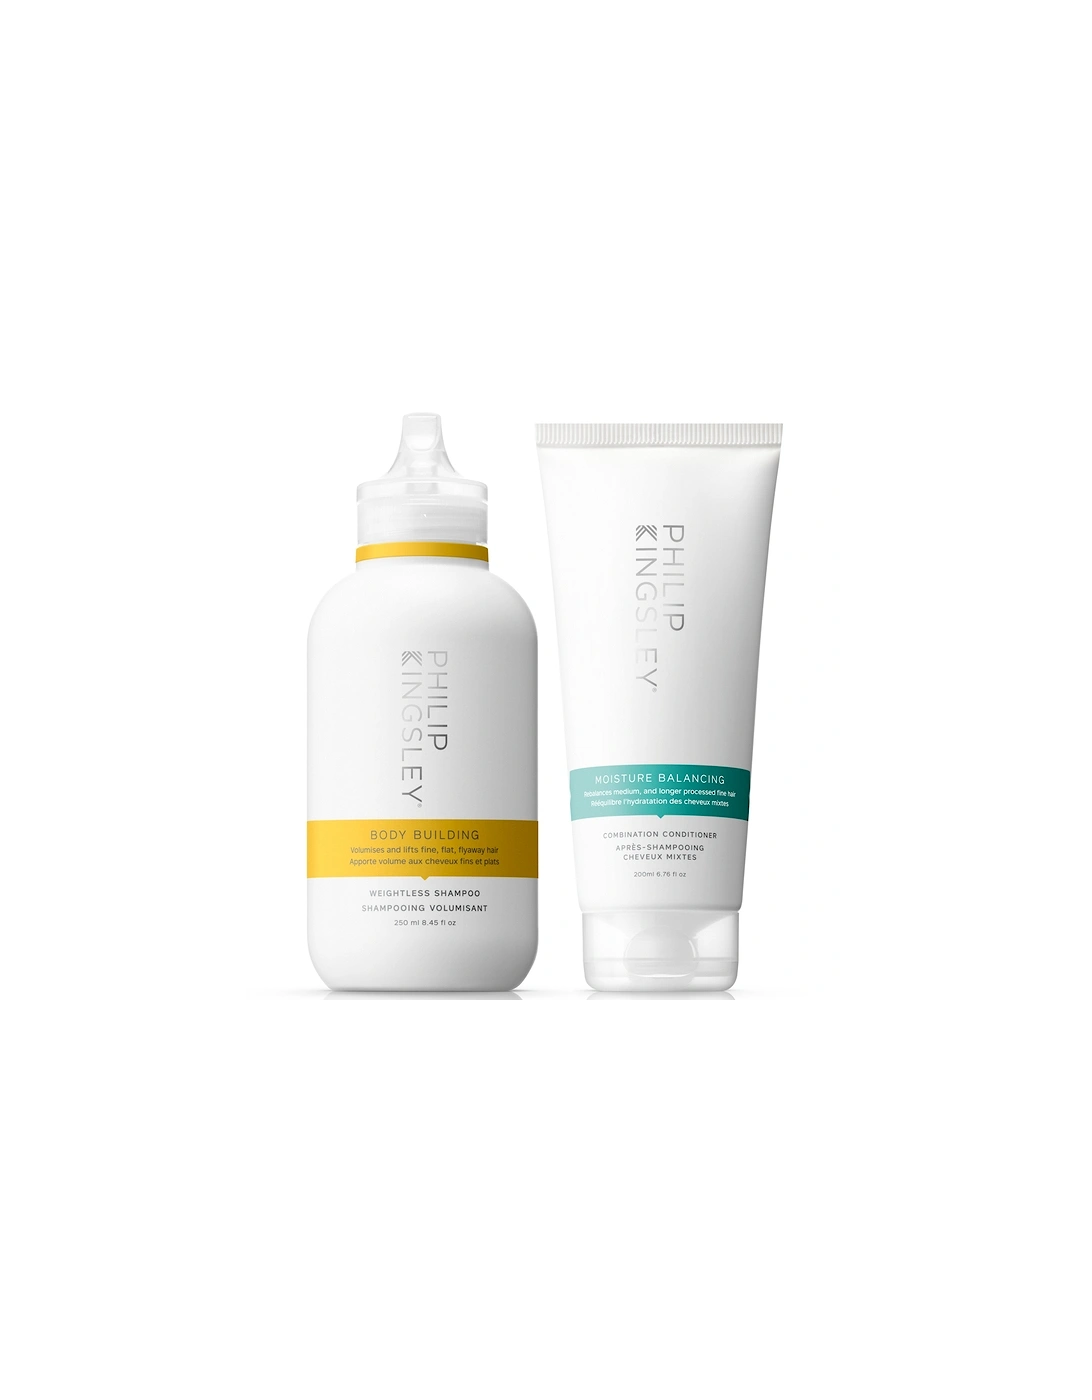 Body Building Shampoo 250ml and Moisture Balancing Conditioner 200ml Duo, 2 of 1